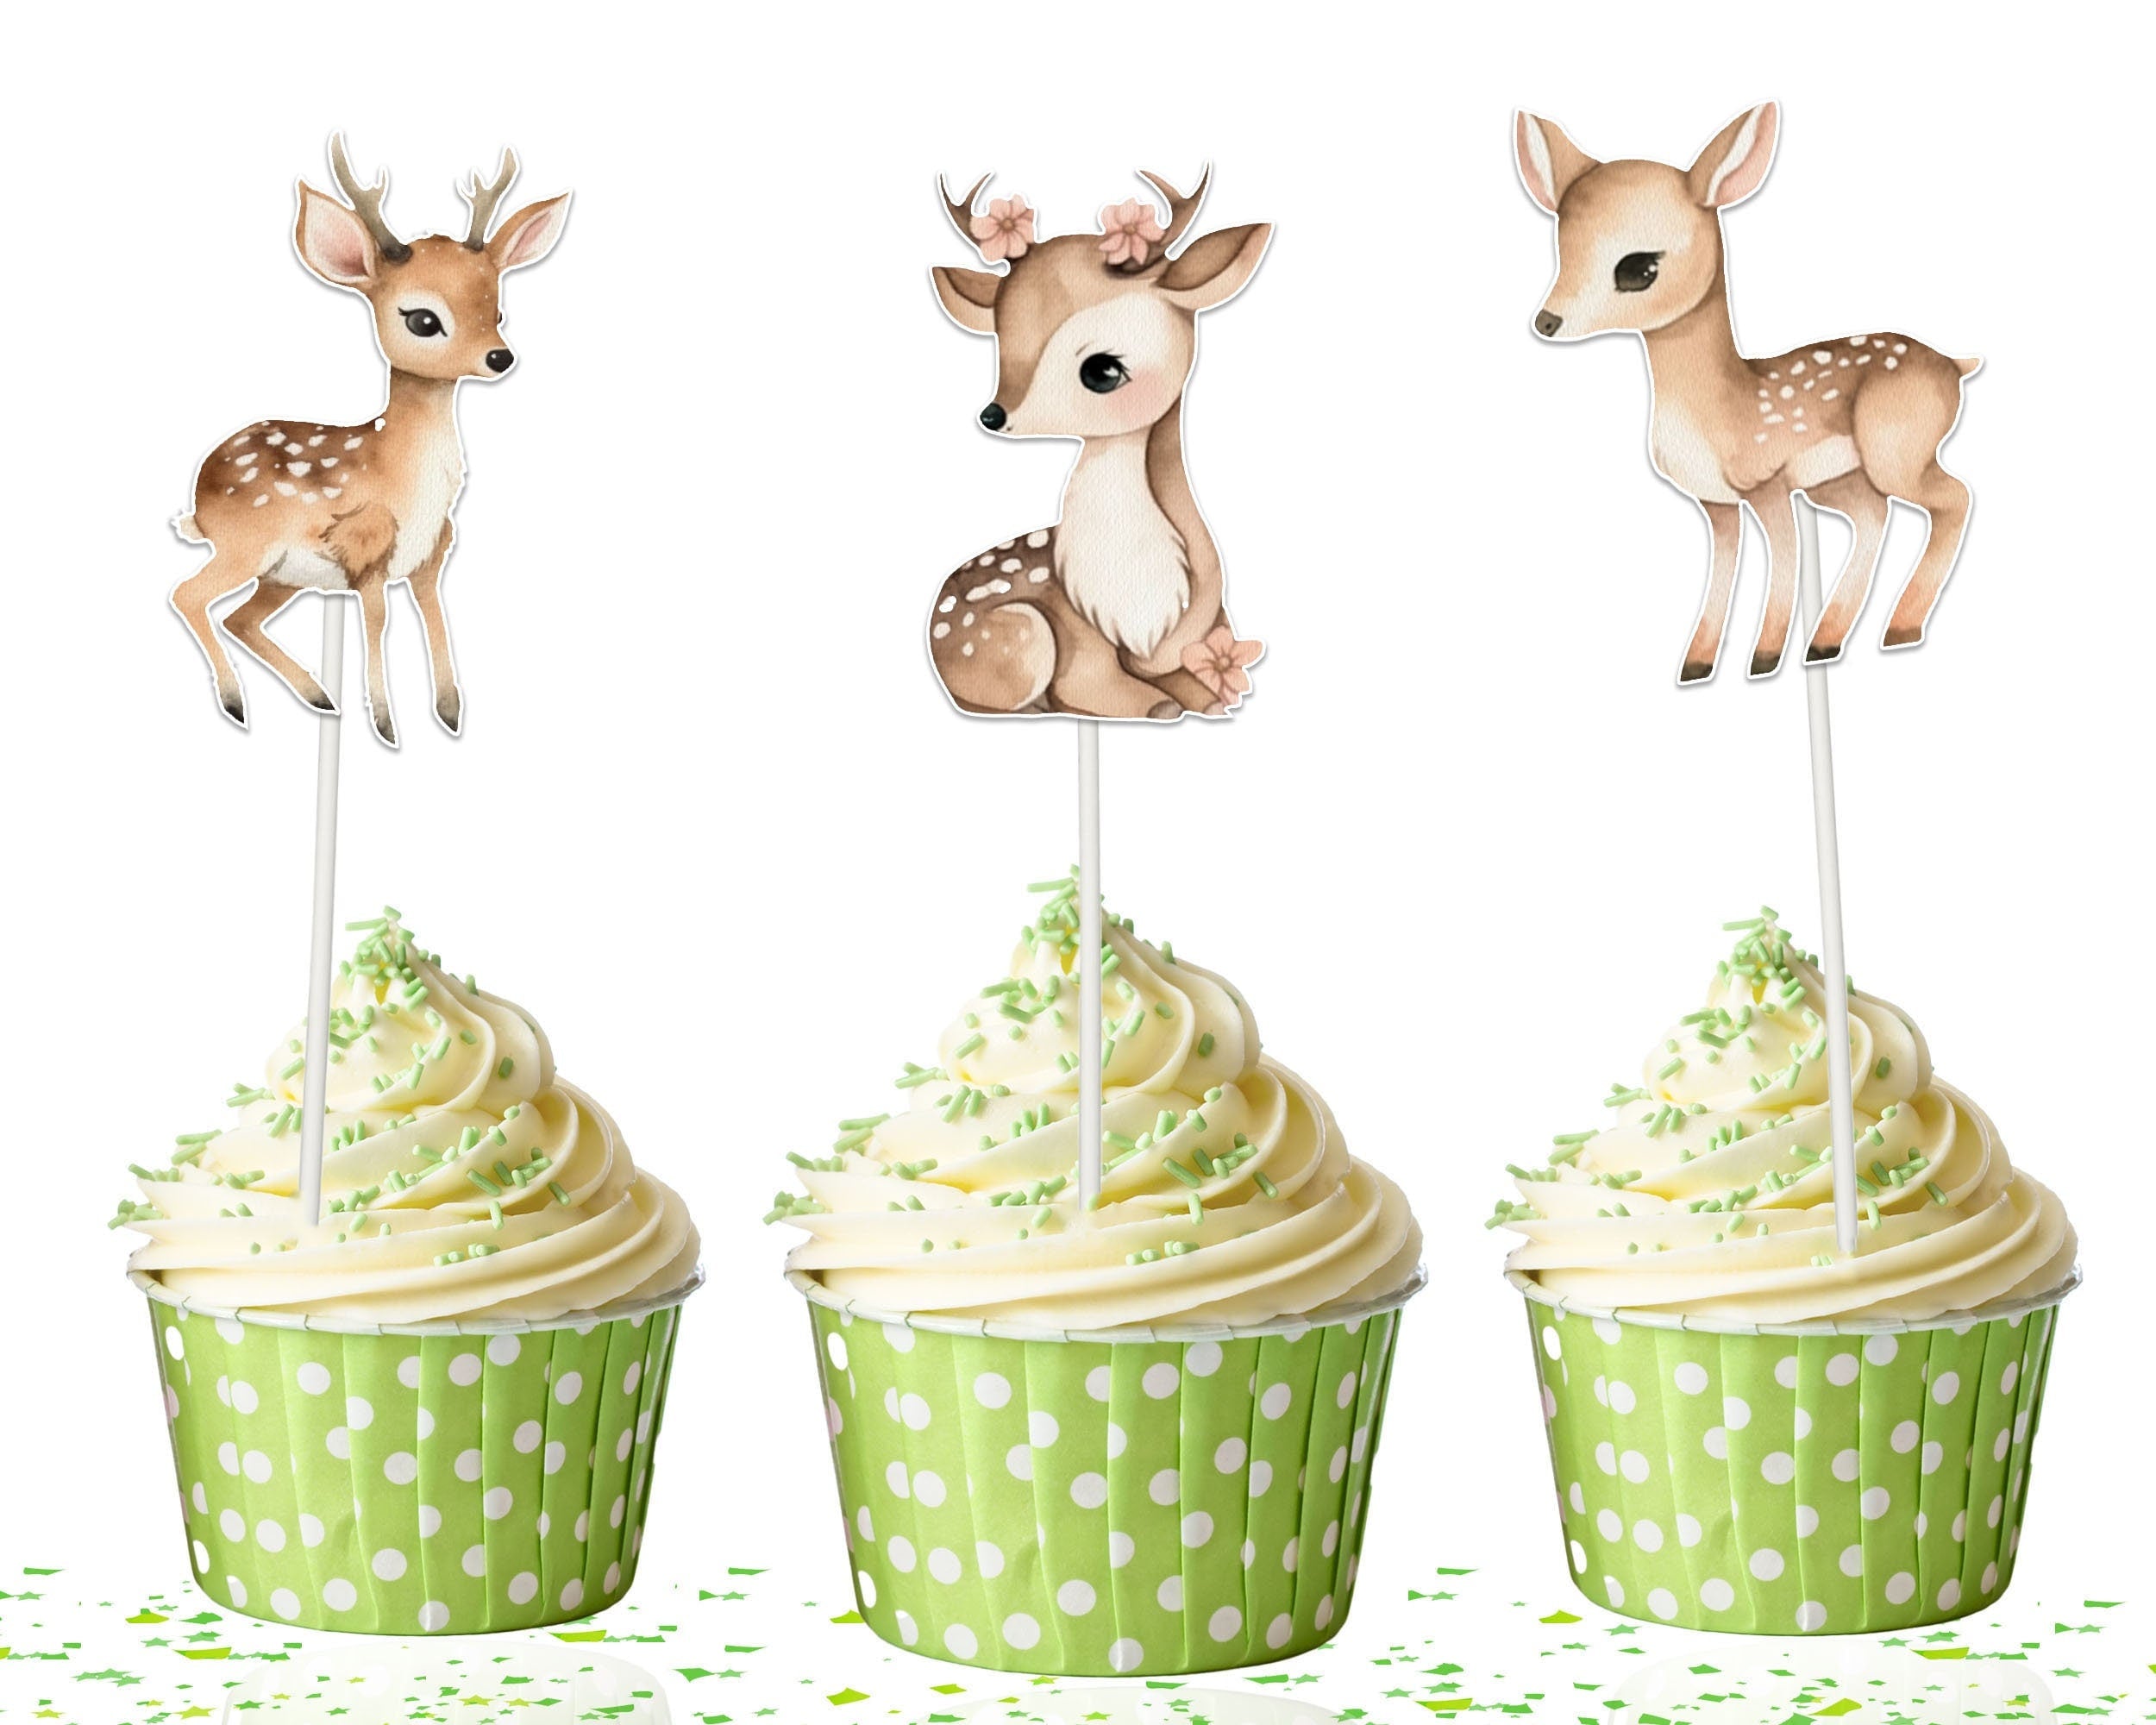 Enchanted Forest Deer Cupcake Toppers - A Whimsical Touch for Your Woodland Gatherings